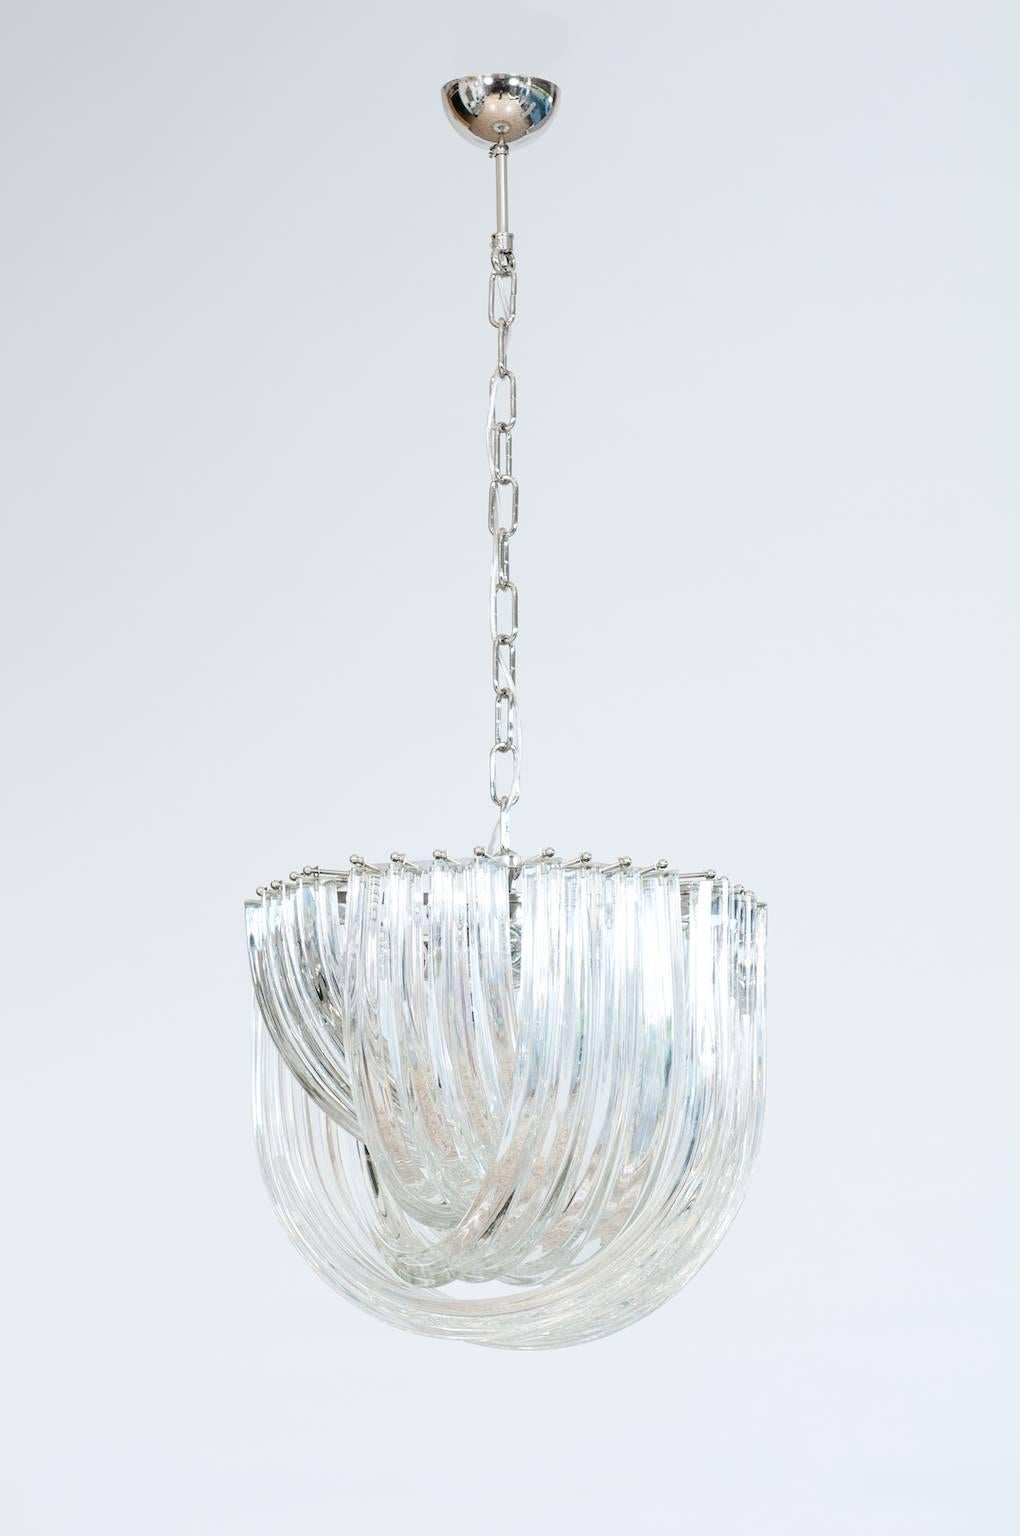 Italian Venetian Curves Flush Mount blown Murano Glass, transparent, 20th
It is a fantastic chandelier, composed by four layers of curves having a tried design, glass prisms on an octagonal chromed framework. The composition of the four layers,